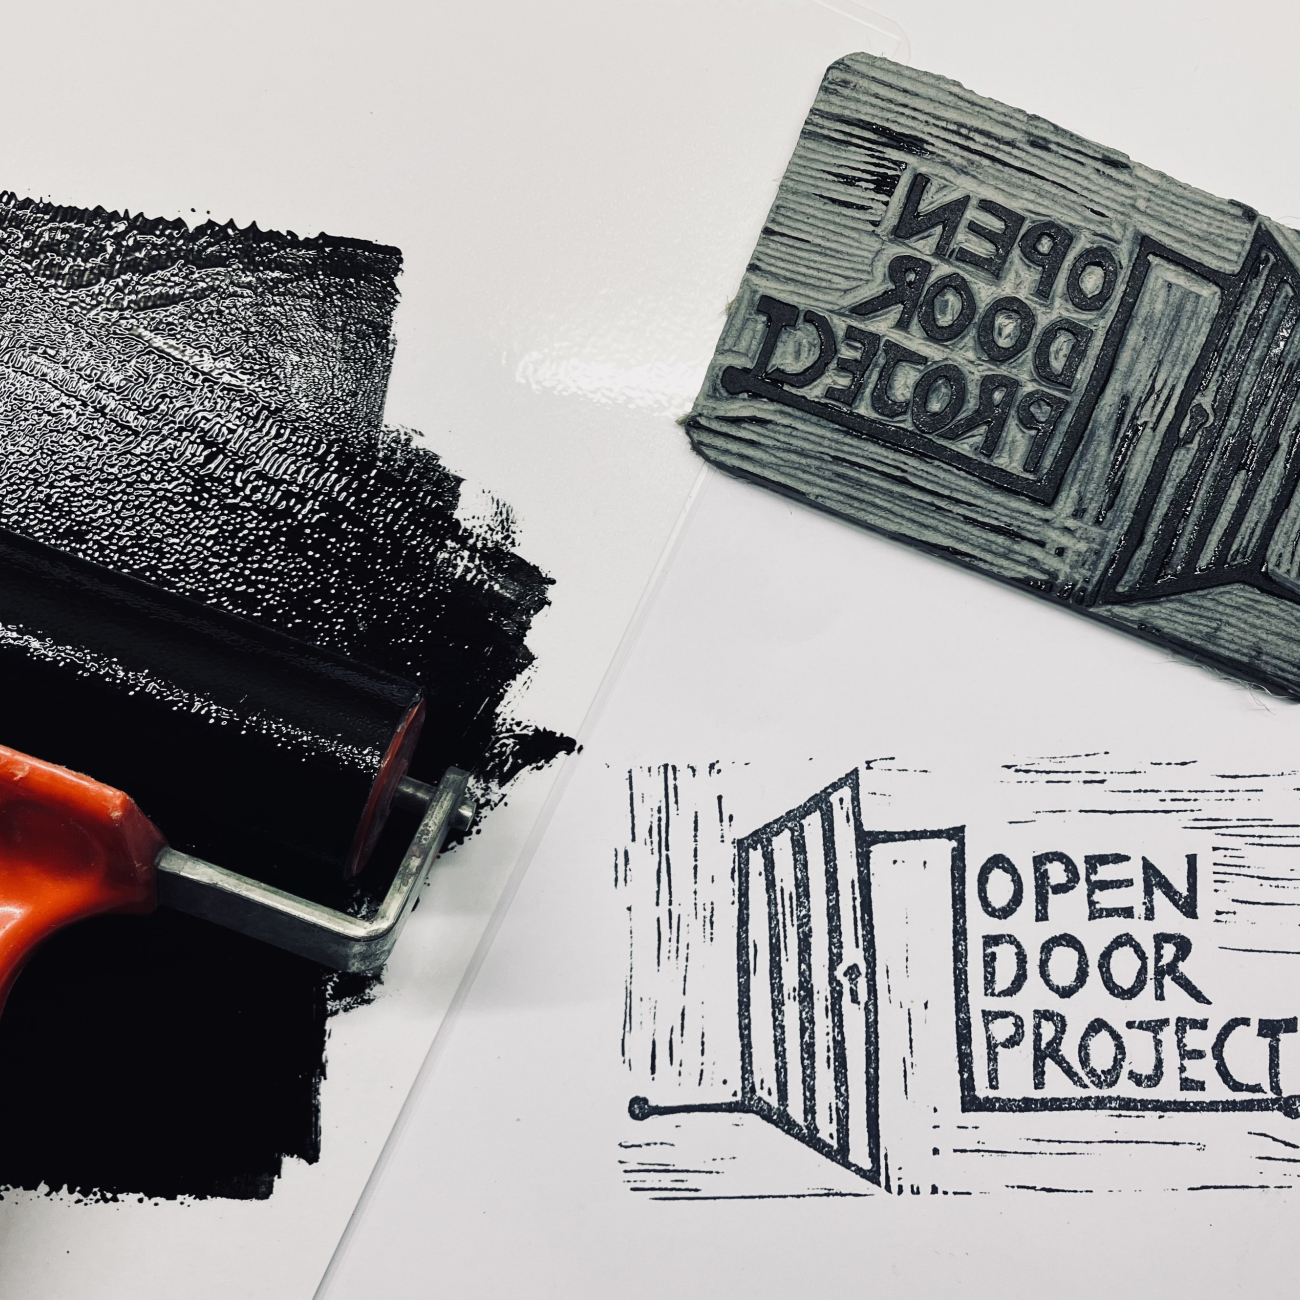 Painting a wall black using a roller, with the words 'Open Door Project' on the side